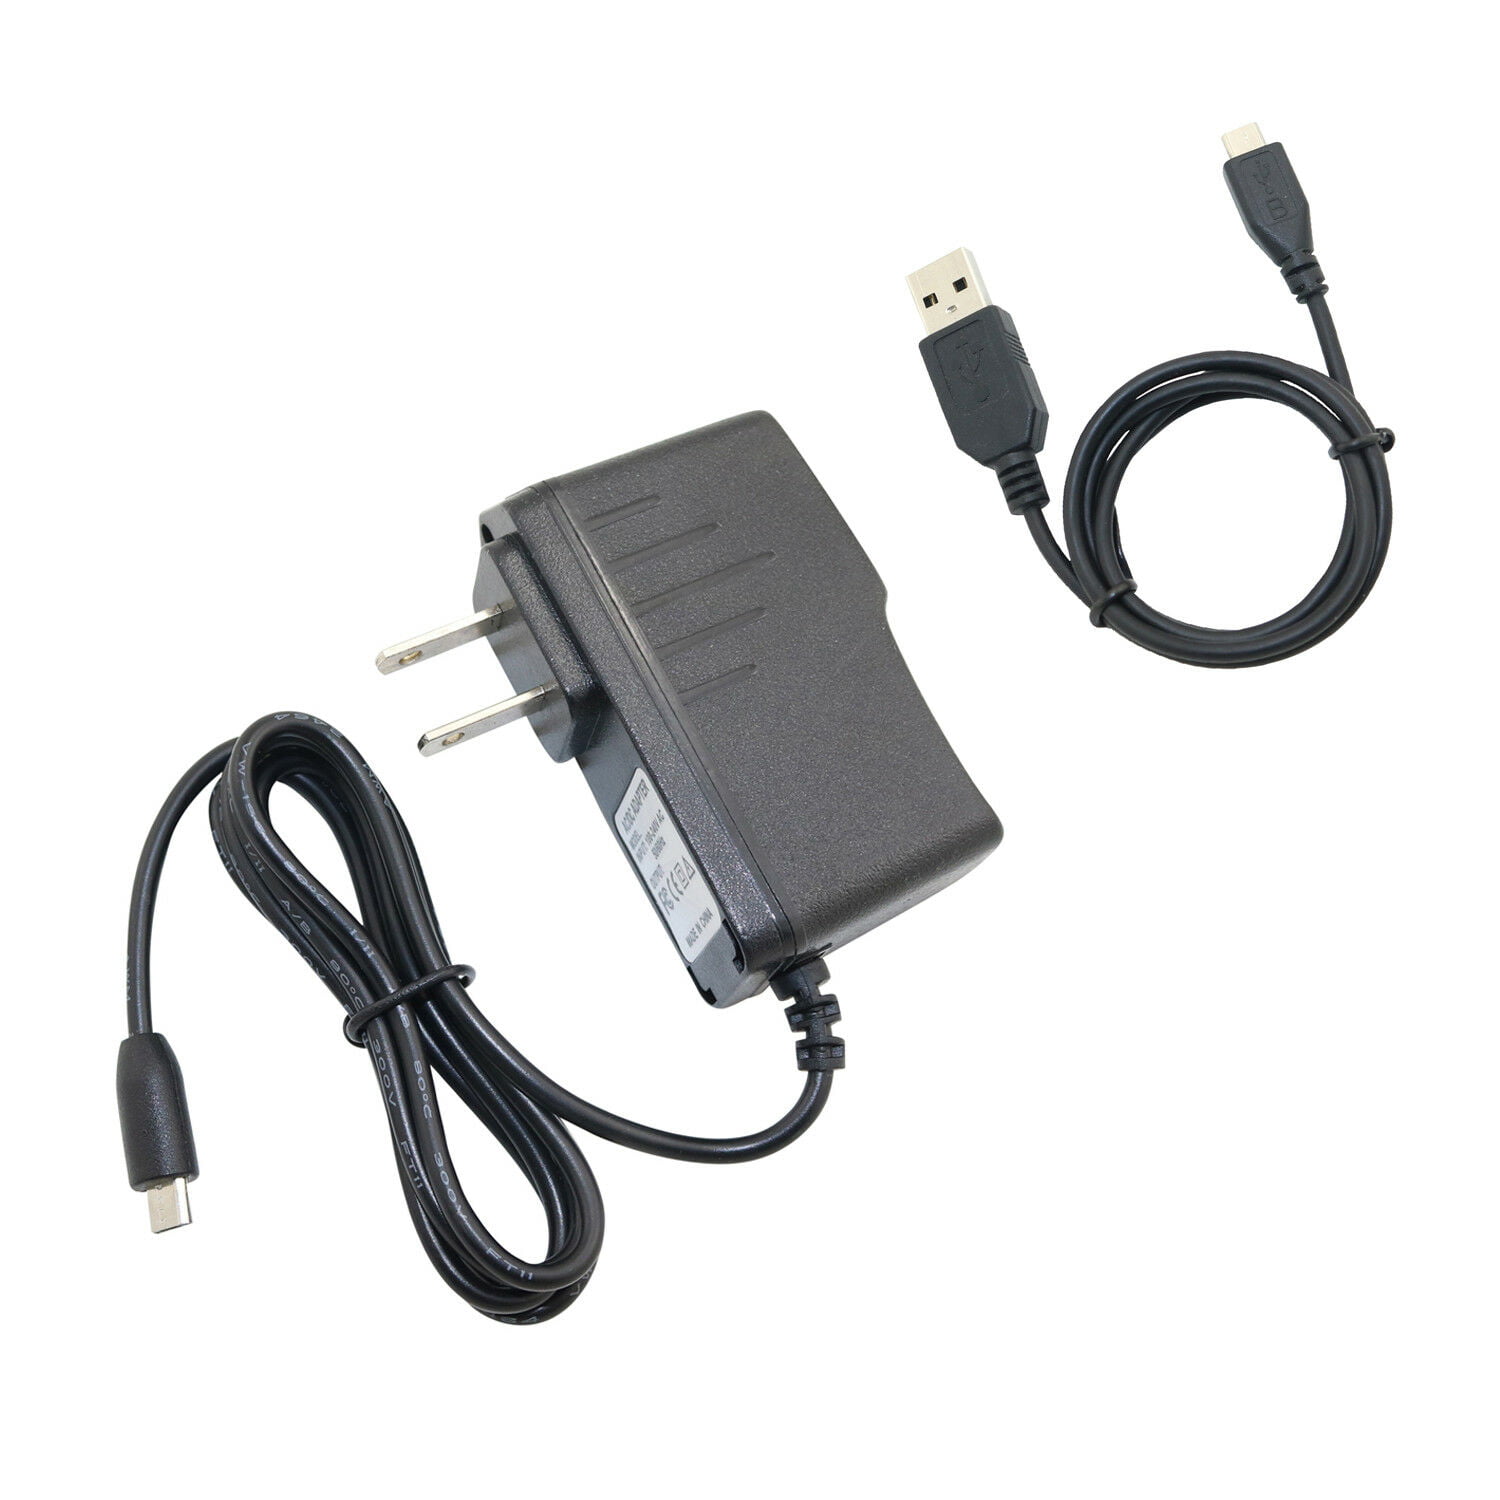 WALL charger AC power adapter cable FOR Nextbook NXA8LTE116 tablet 